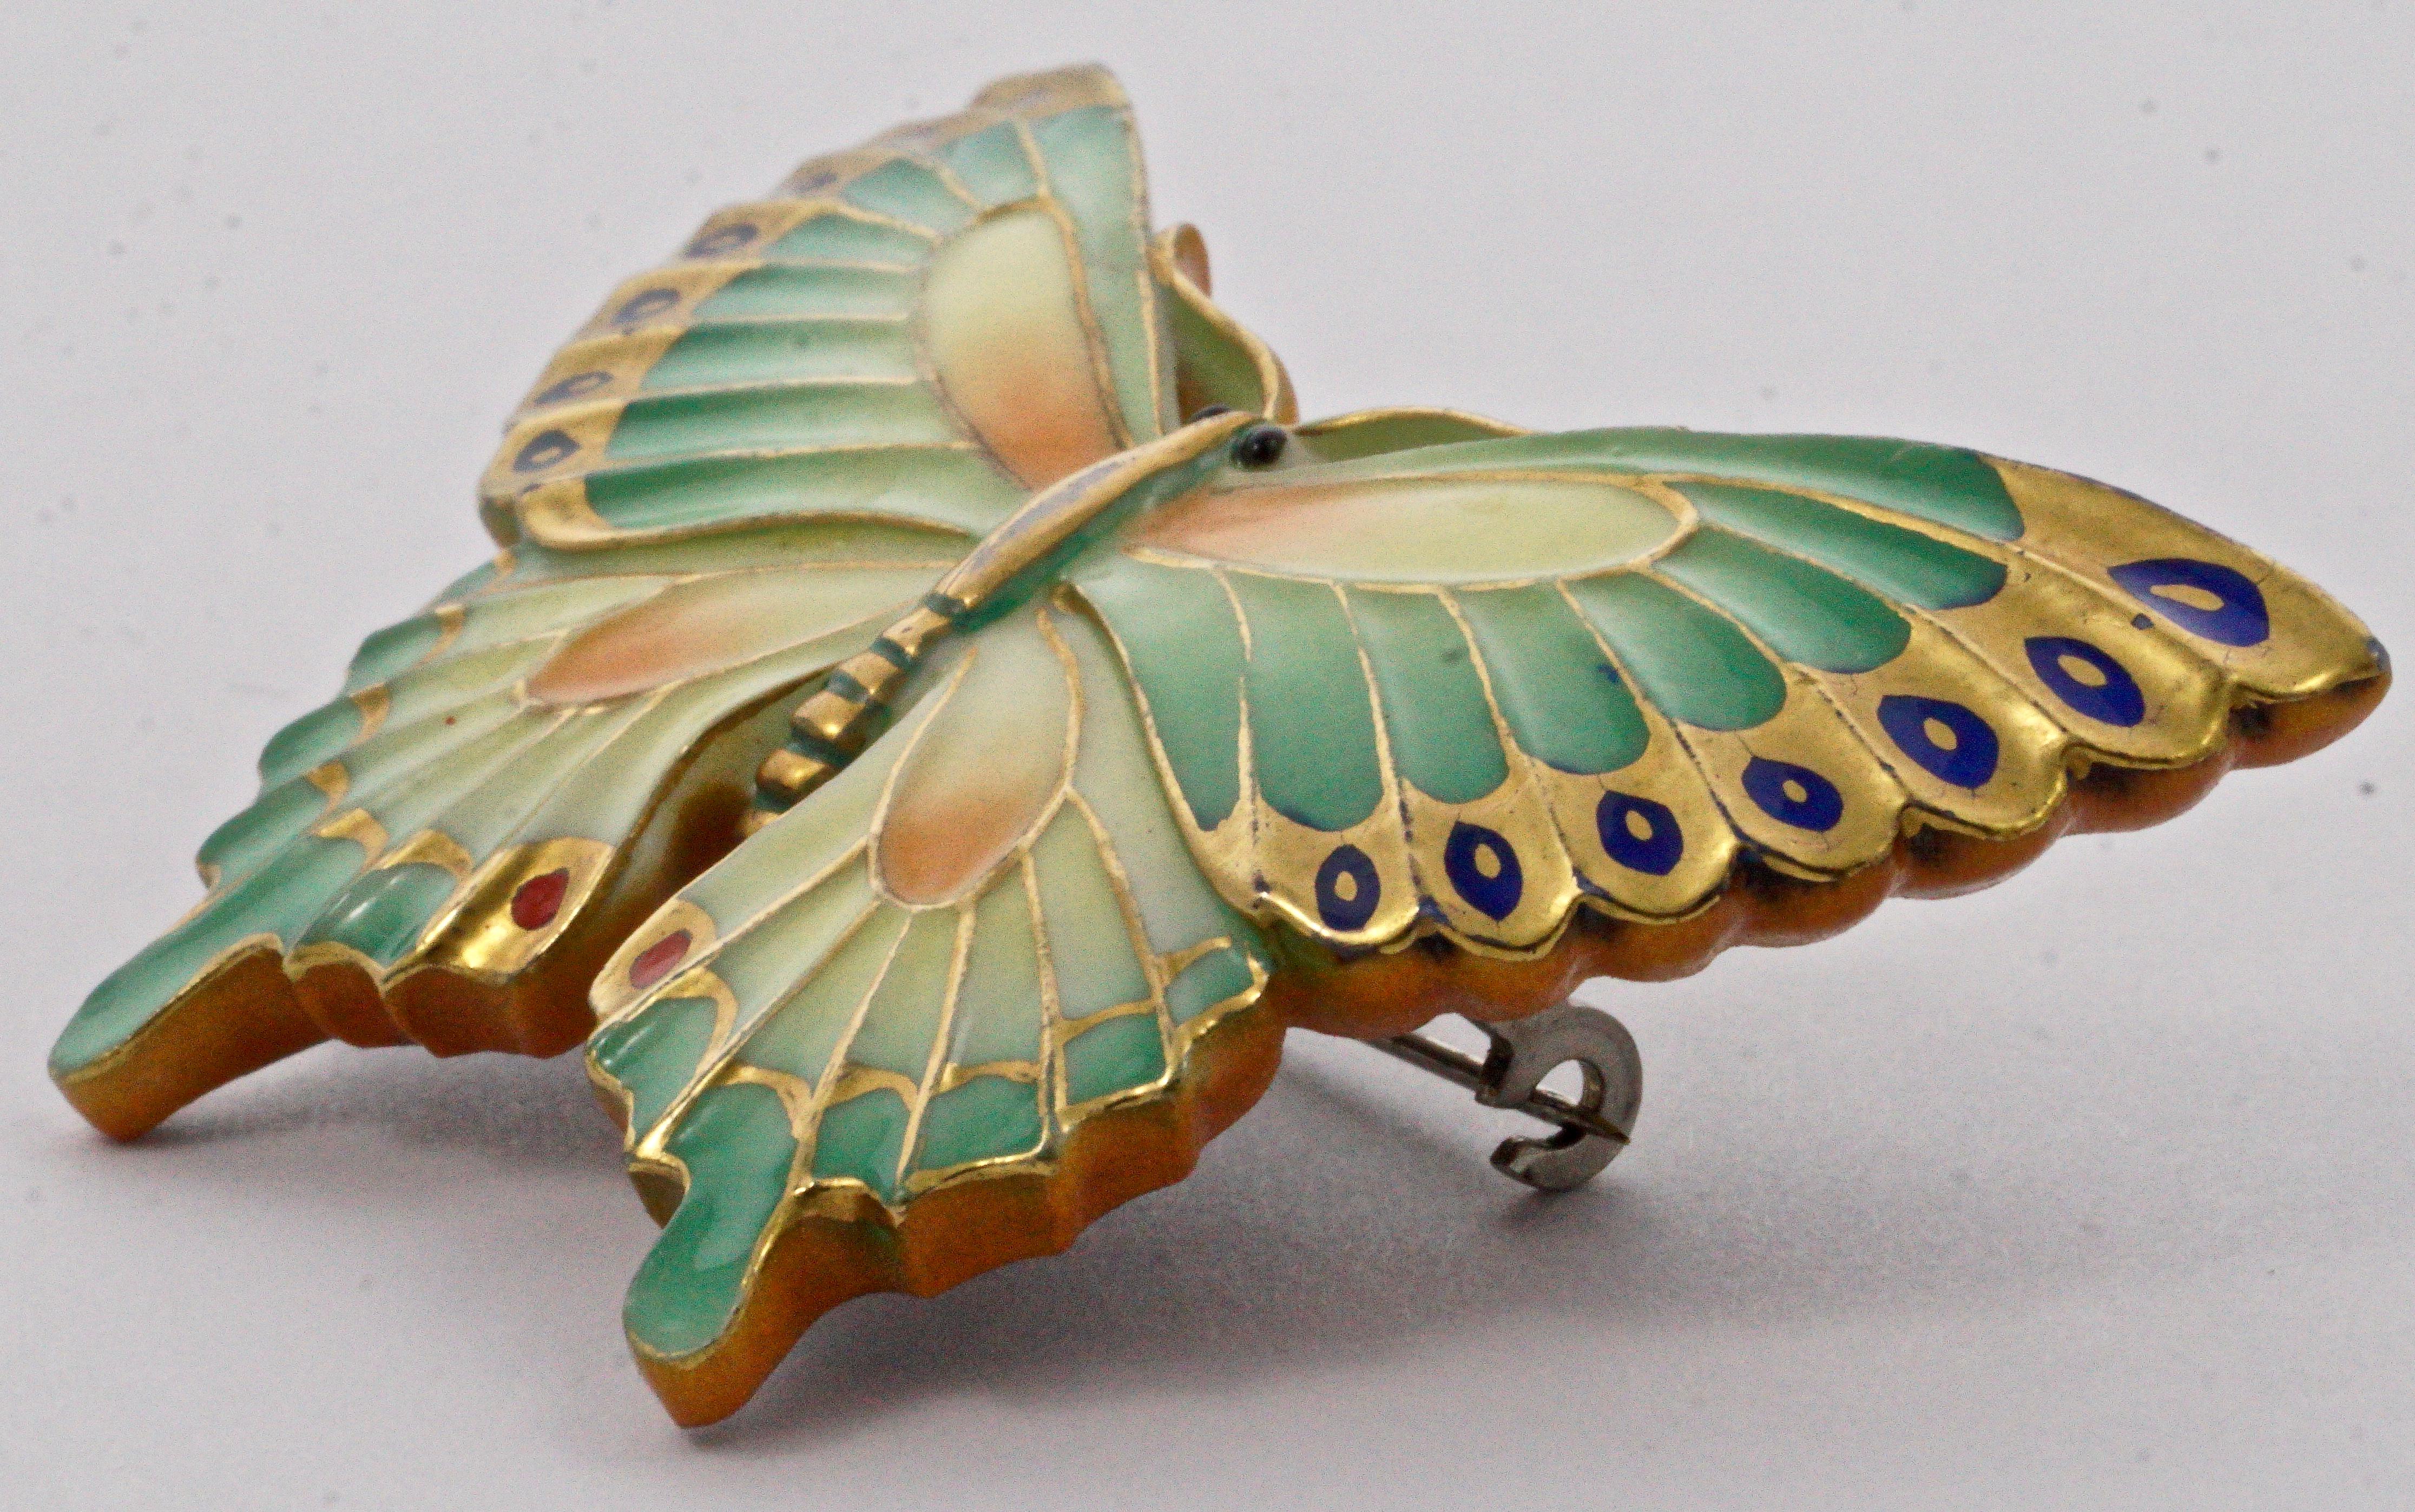 Toshikane Japan Porcelain Multi Coloured Butterfly Brooch with Silver Tone Back 3